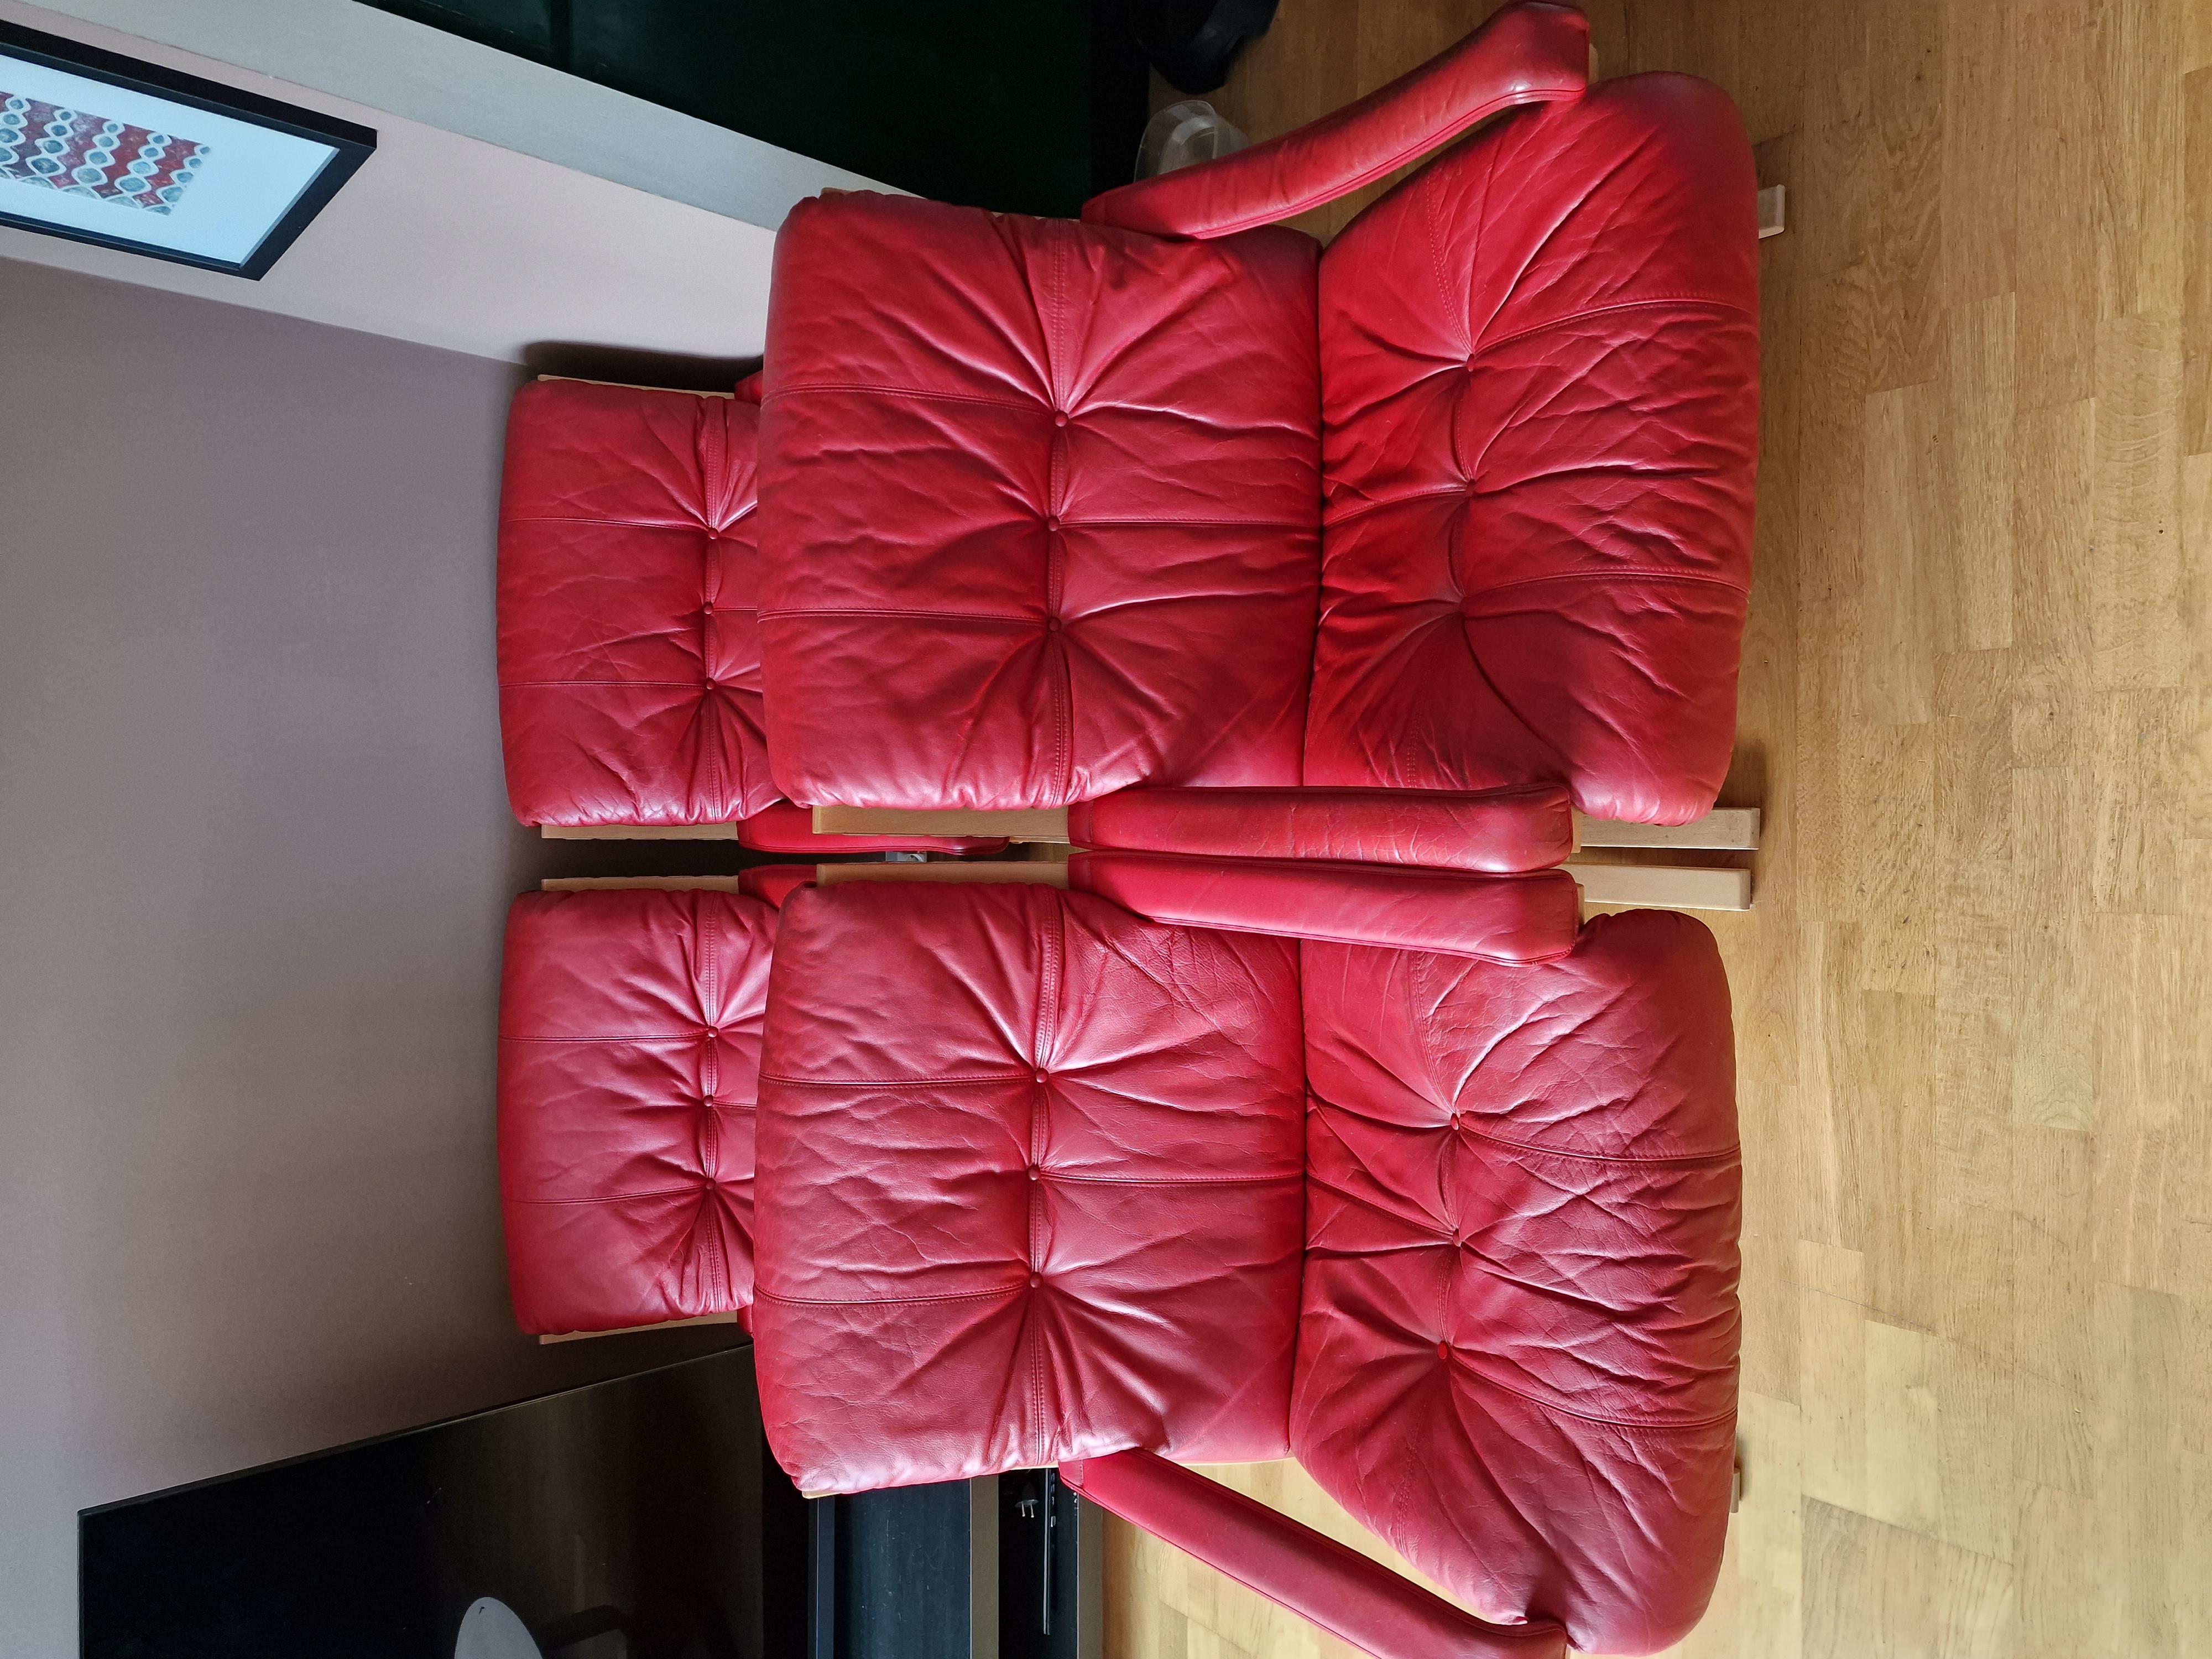  4 Vintage Original Siesta Leather Chairs by Ingmar Relling In Good Condition For Sale In Asker, 30